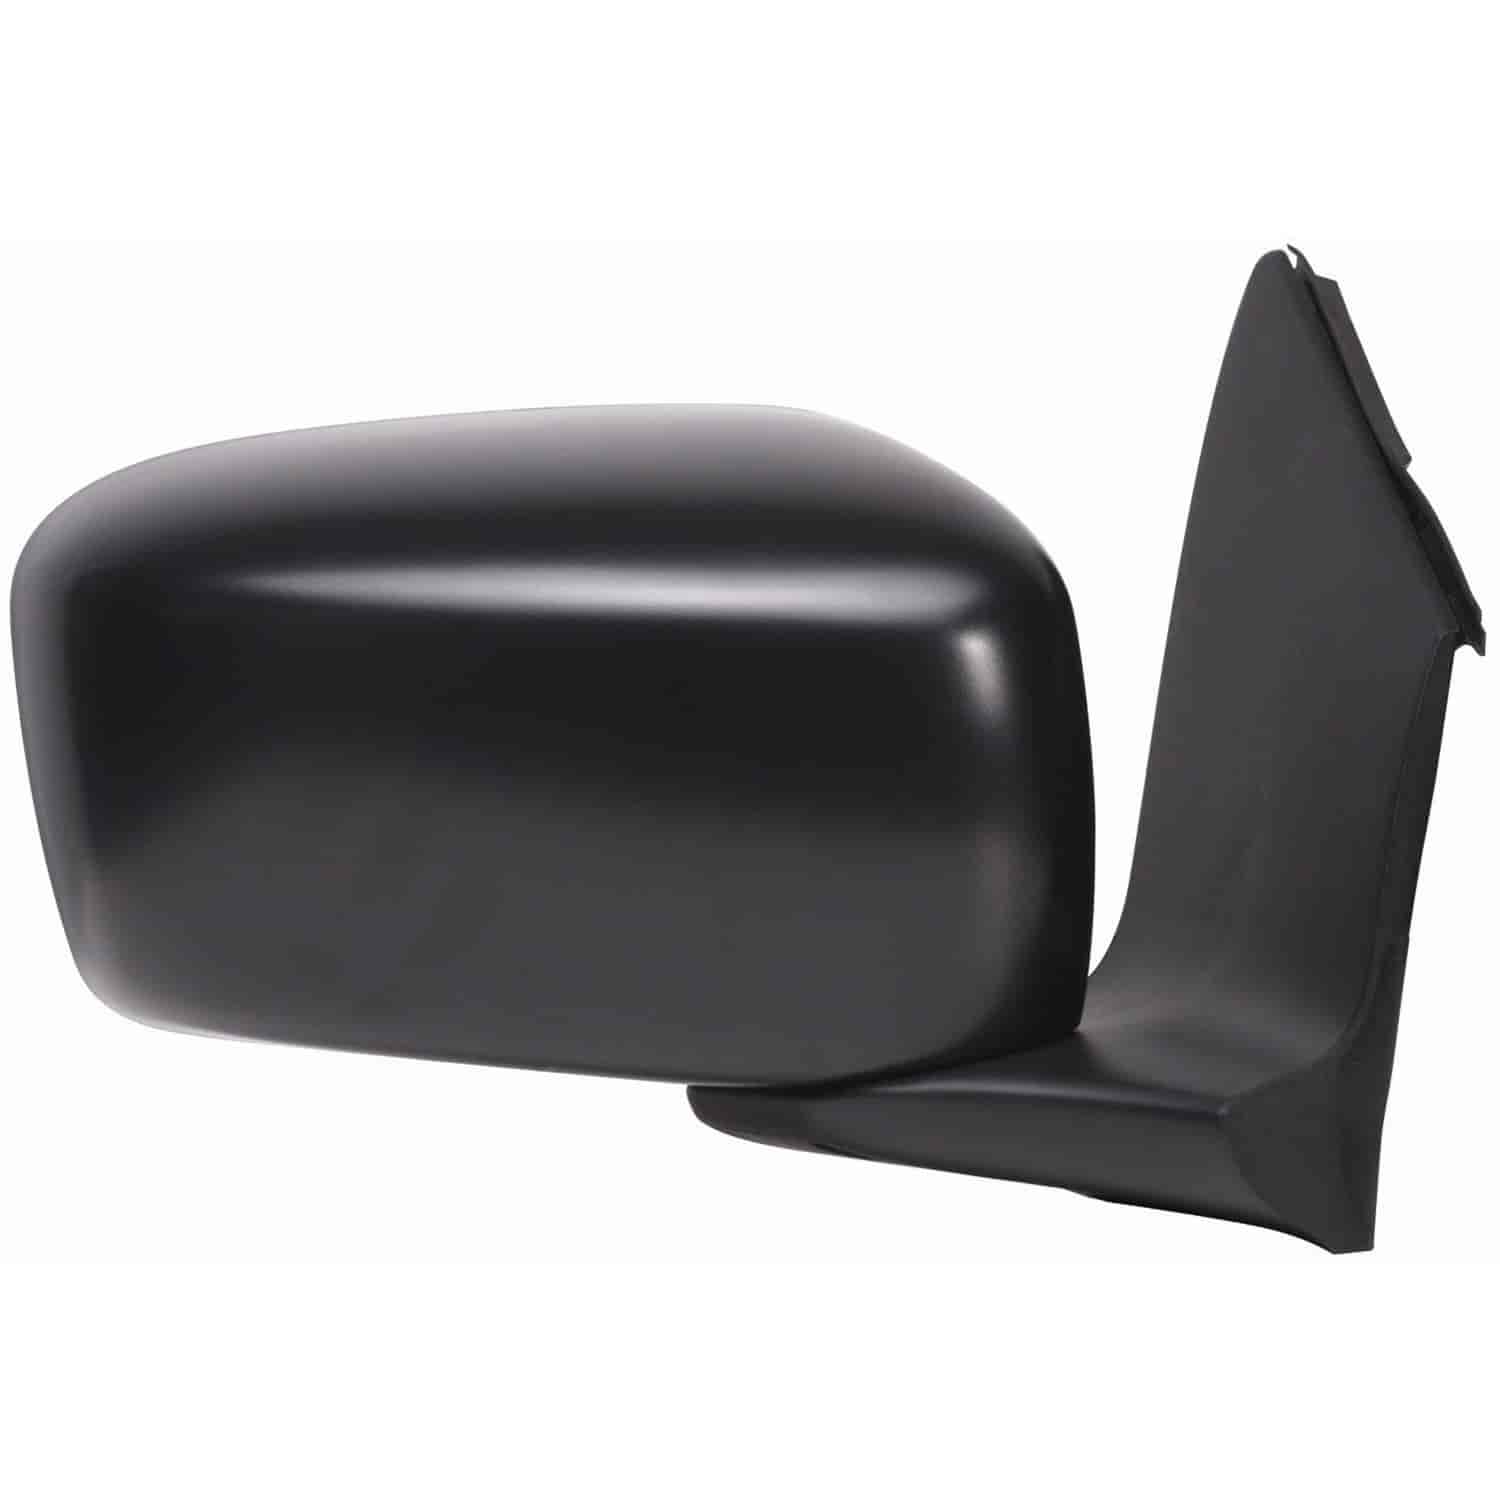 OEM Style Replacement mirror for 05-10 Honda Odyssey passenger side mirror tested to fit and functio